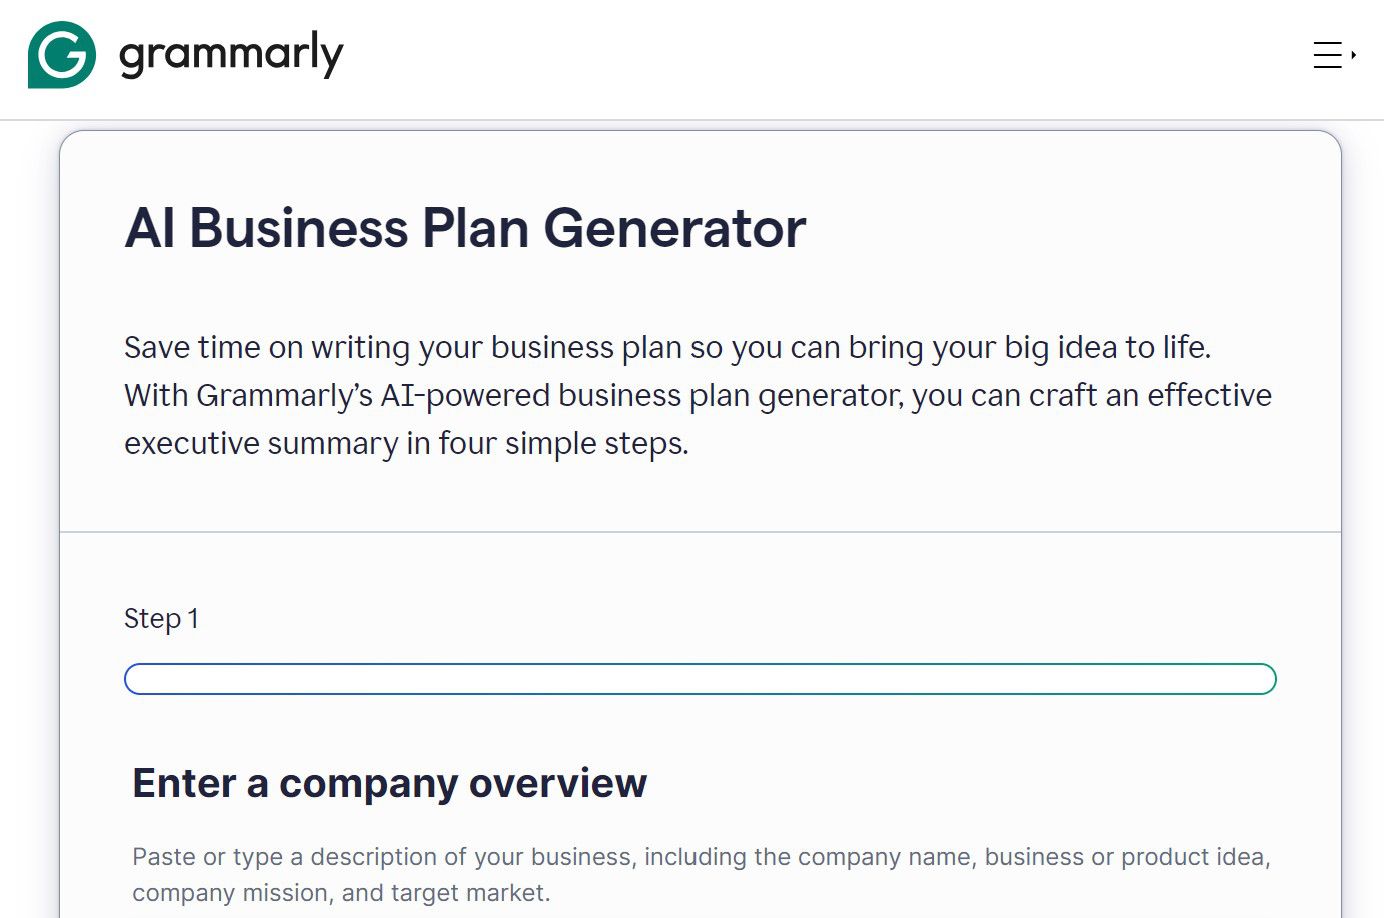 <p>Grammarly is a versatile tool that primarily helps individuals enhance their writing. It can find grammar mistakes and provide suggestions to modify sentence structure, resulting in high-quality content.</p><p>With AI integration, Grammarly can help you create a polished business plan with the right tone, length, and formality. This AI-powered tool features straightforward outlines for drafting various business plan portions like the executive summary, company description, and mission statement.</p><p>Pros:</p><ul><li>Tailored toward creating quality and error-free content</li><li>Offers style and tone suggestions to ensure you write a business plan with a consistent voice</li><li>Features a simple and user-friendly interface</li></ul><p>Cons:</p><ul><li>Can create inaccurate content</li><li>Requires lengthy prompts to provide detailed responses</li></ul><p>Pricing:</p><ul><li>Free plan with limited features</li><li>Premium plan for $12 per month</li><li>Business edition for $15 per member each month</li></ul>